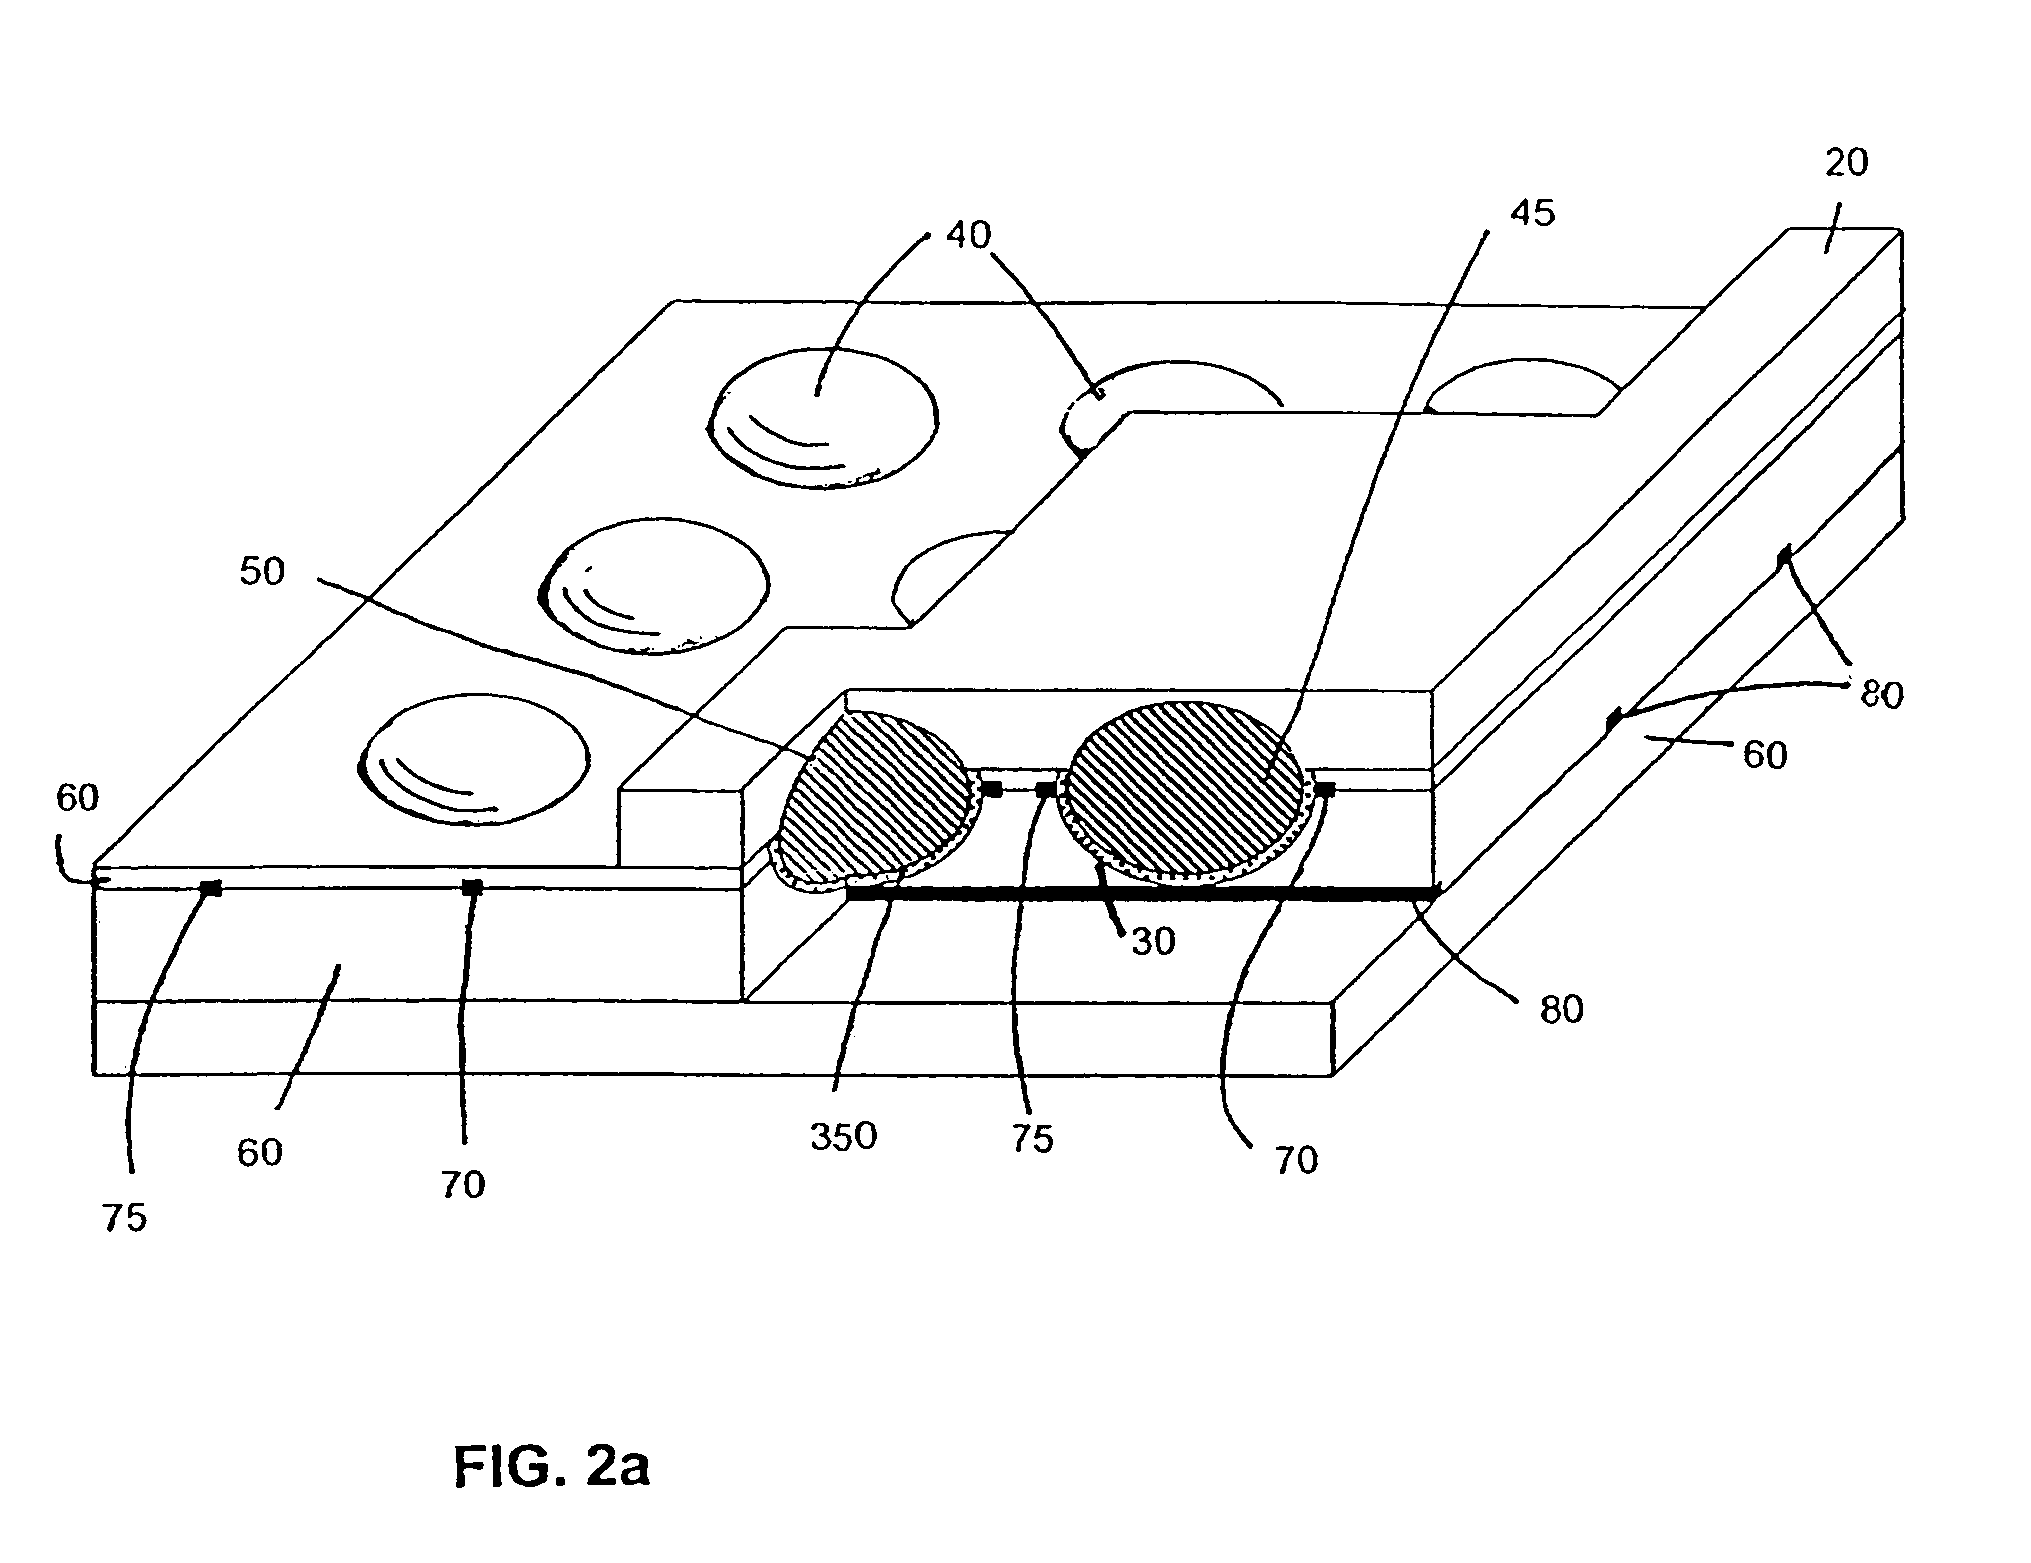 Liquid manufacturing processes for panel layer fabrication